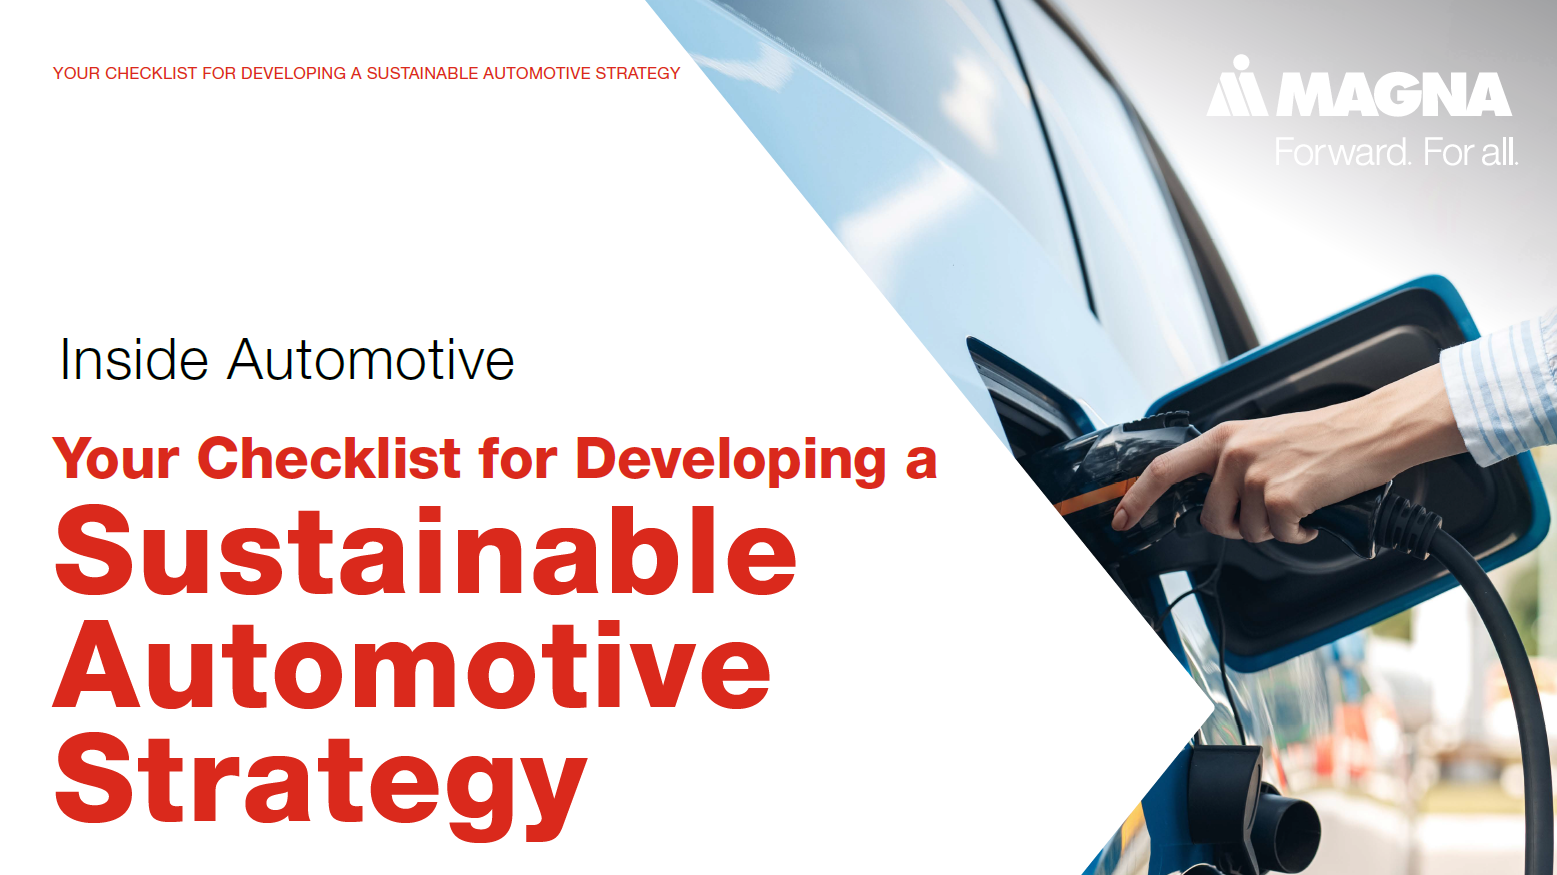 checklist from Magna Steyr for a sustainable automotive strategy